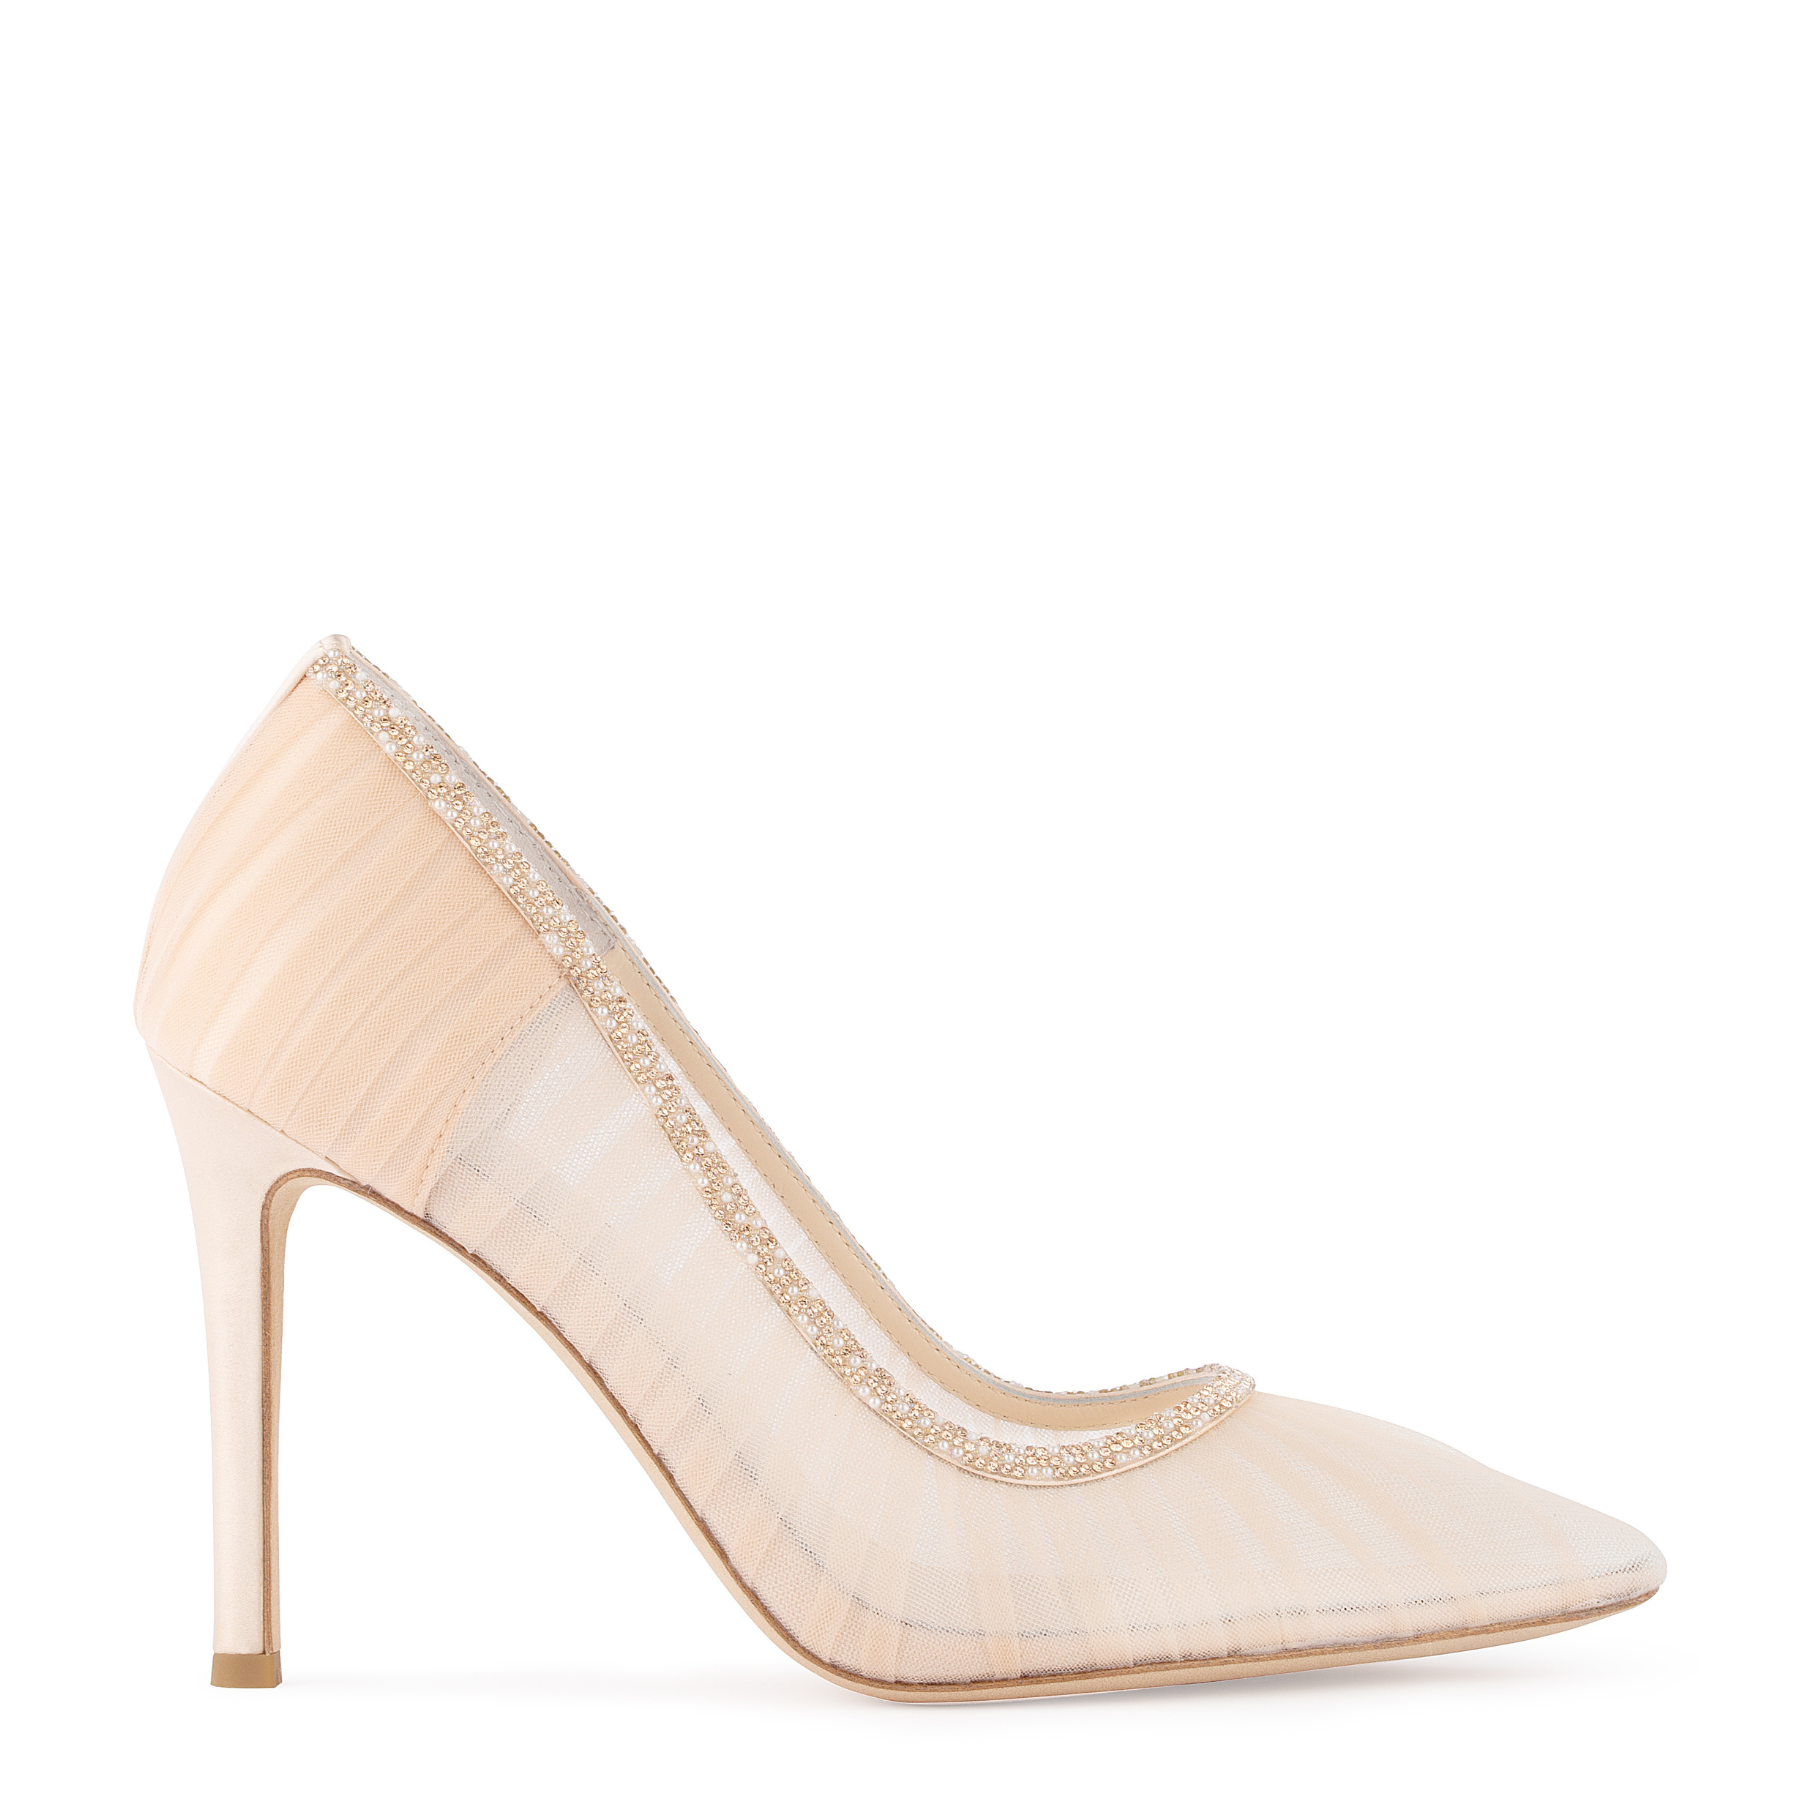 Buy Wedding & Bridal Pumps | The White Collection AU | The White Collection